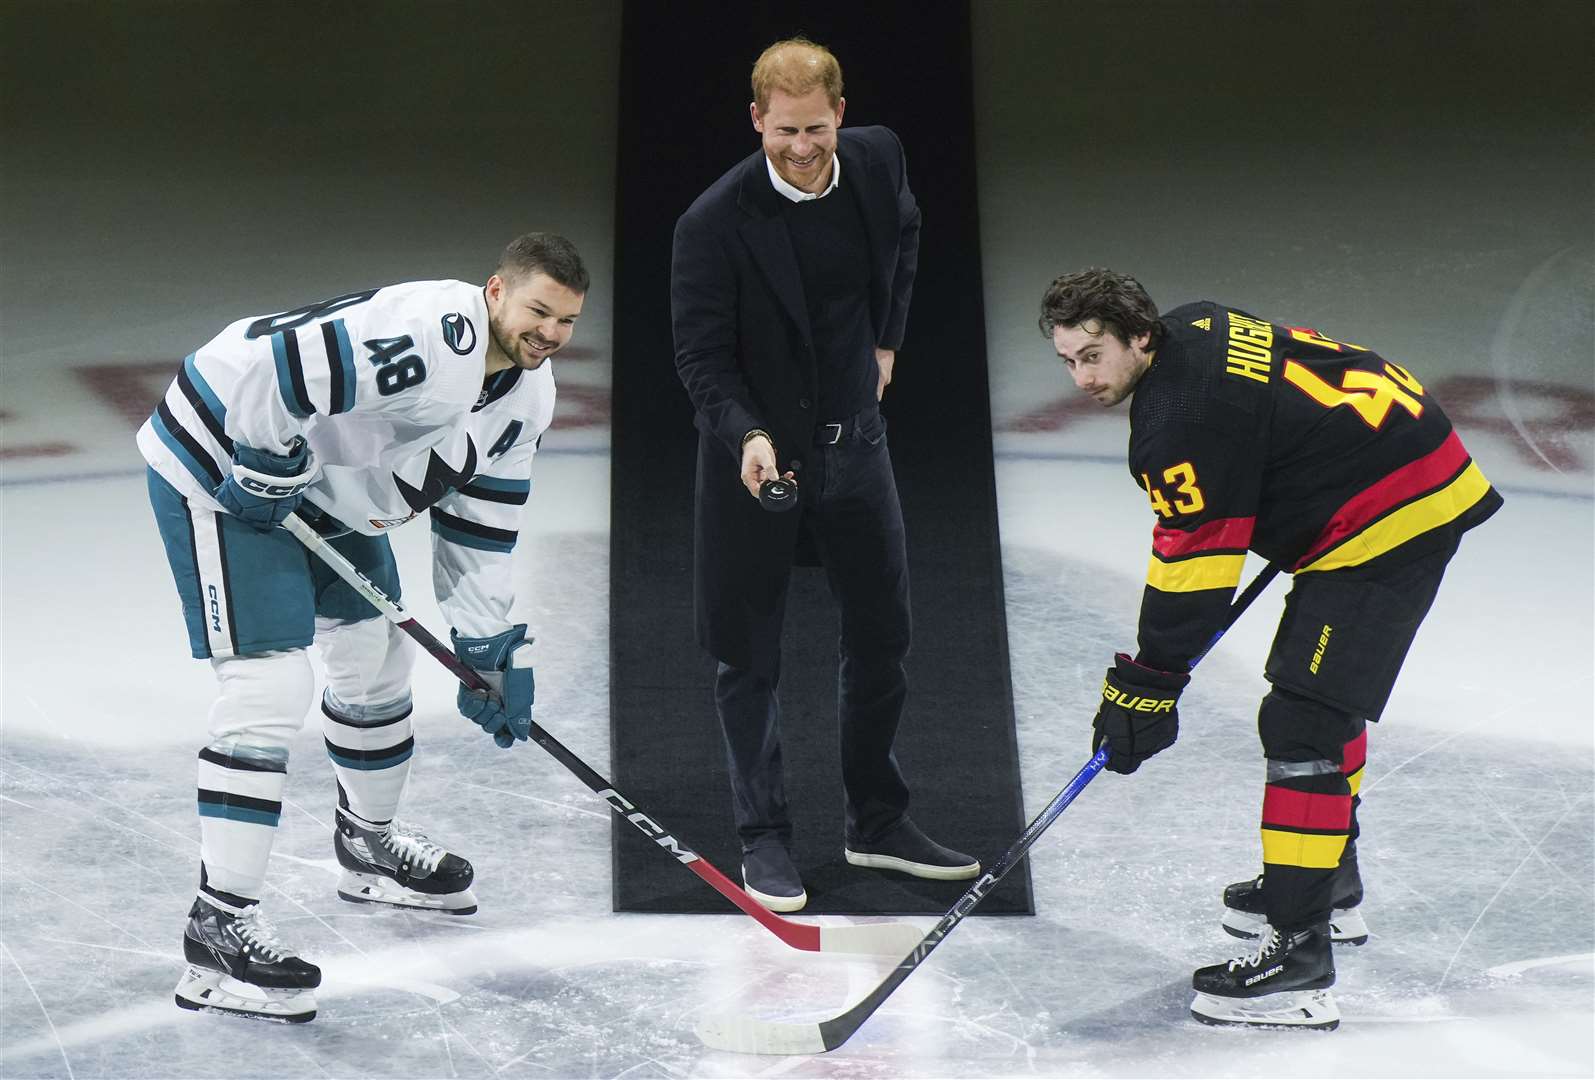 Harry drops the puck for during a ceremonial face off prior to an NHL hockey game in Vancouver, British Columbia (Darryl Dyck/AP)